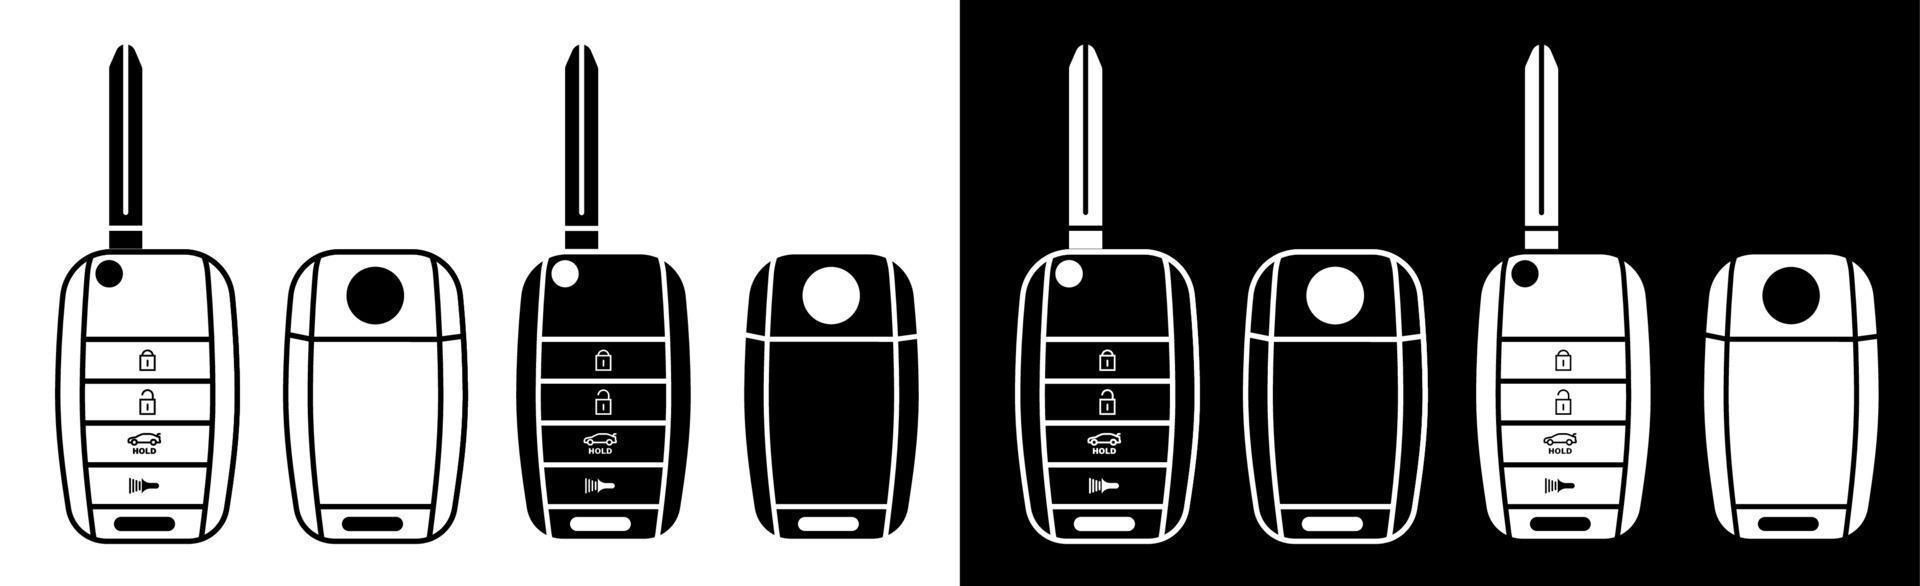 Folding car key. Car alarm, key fob. black and white vector in flat and linear style